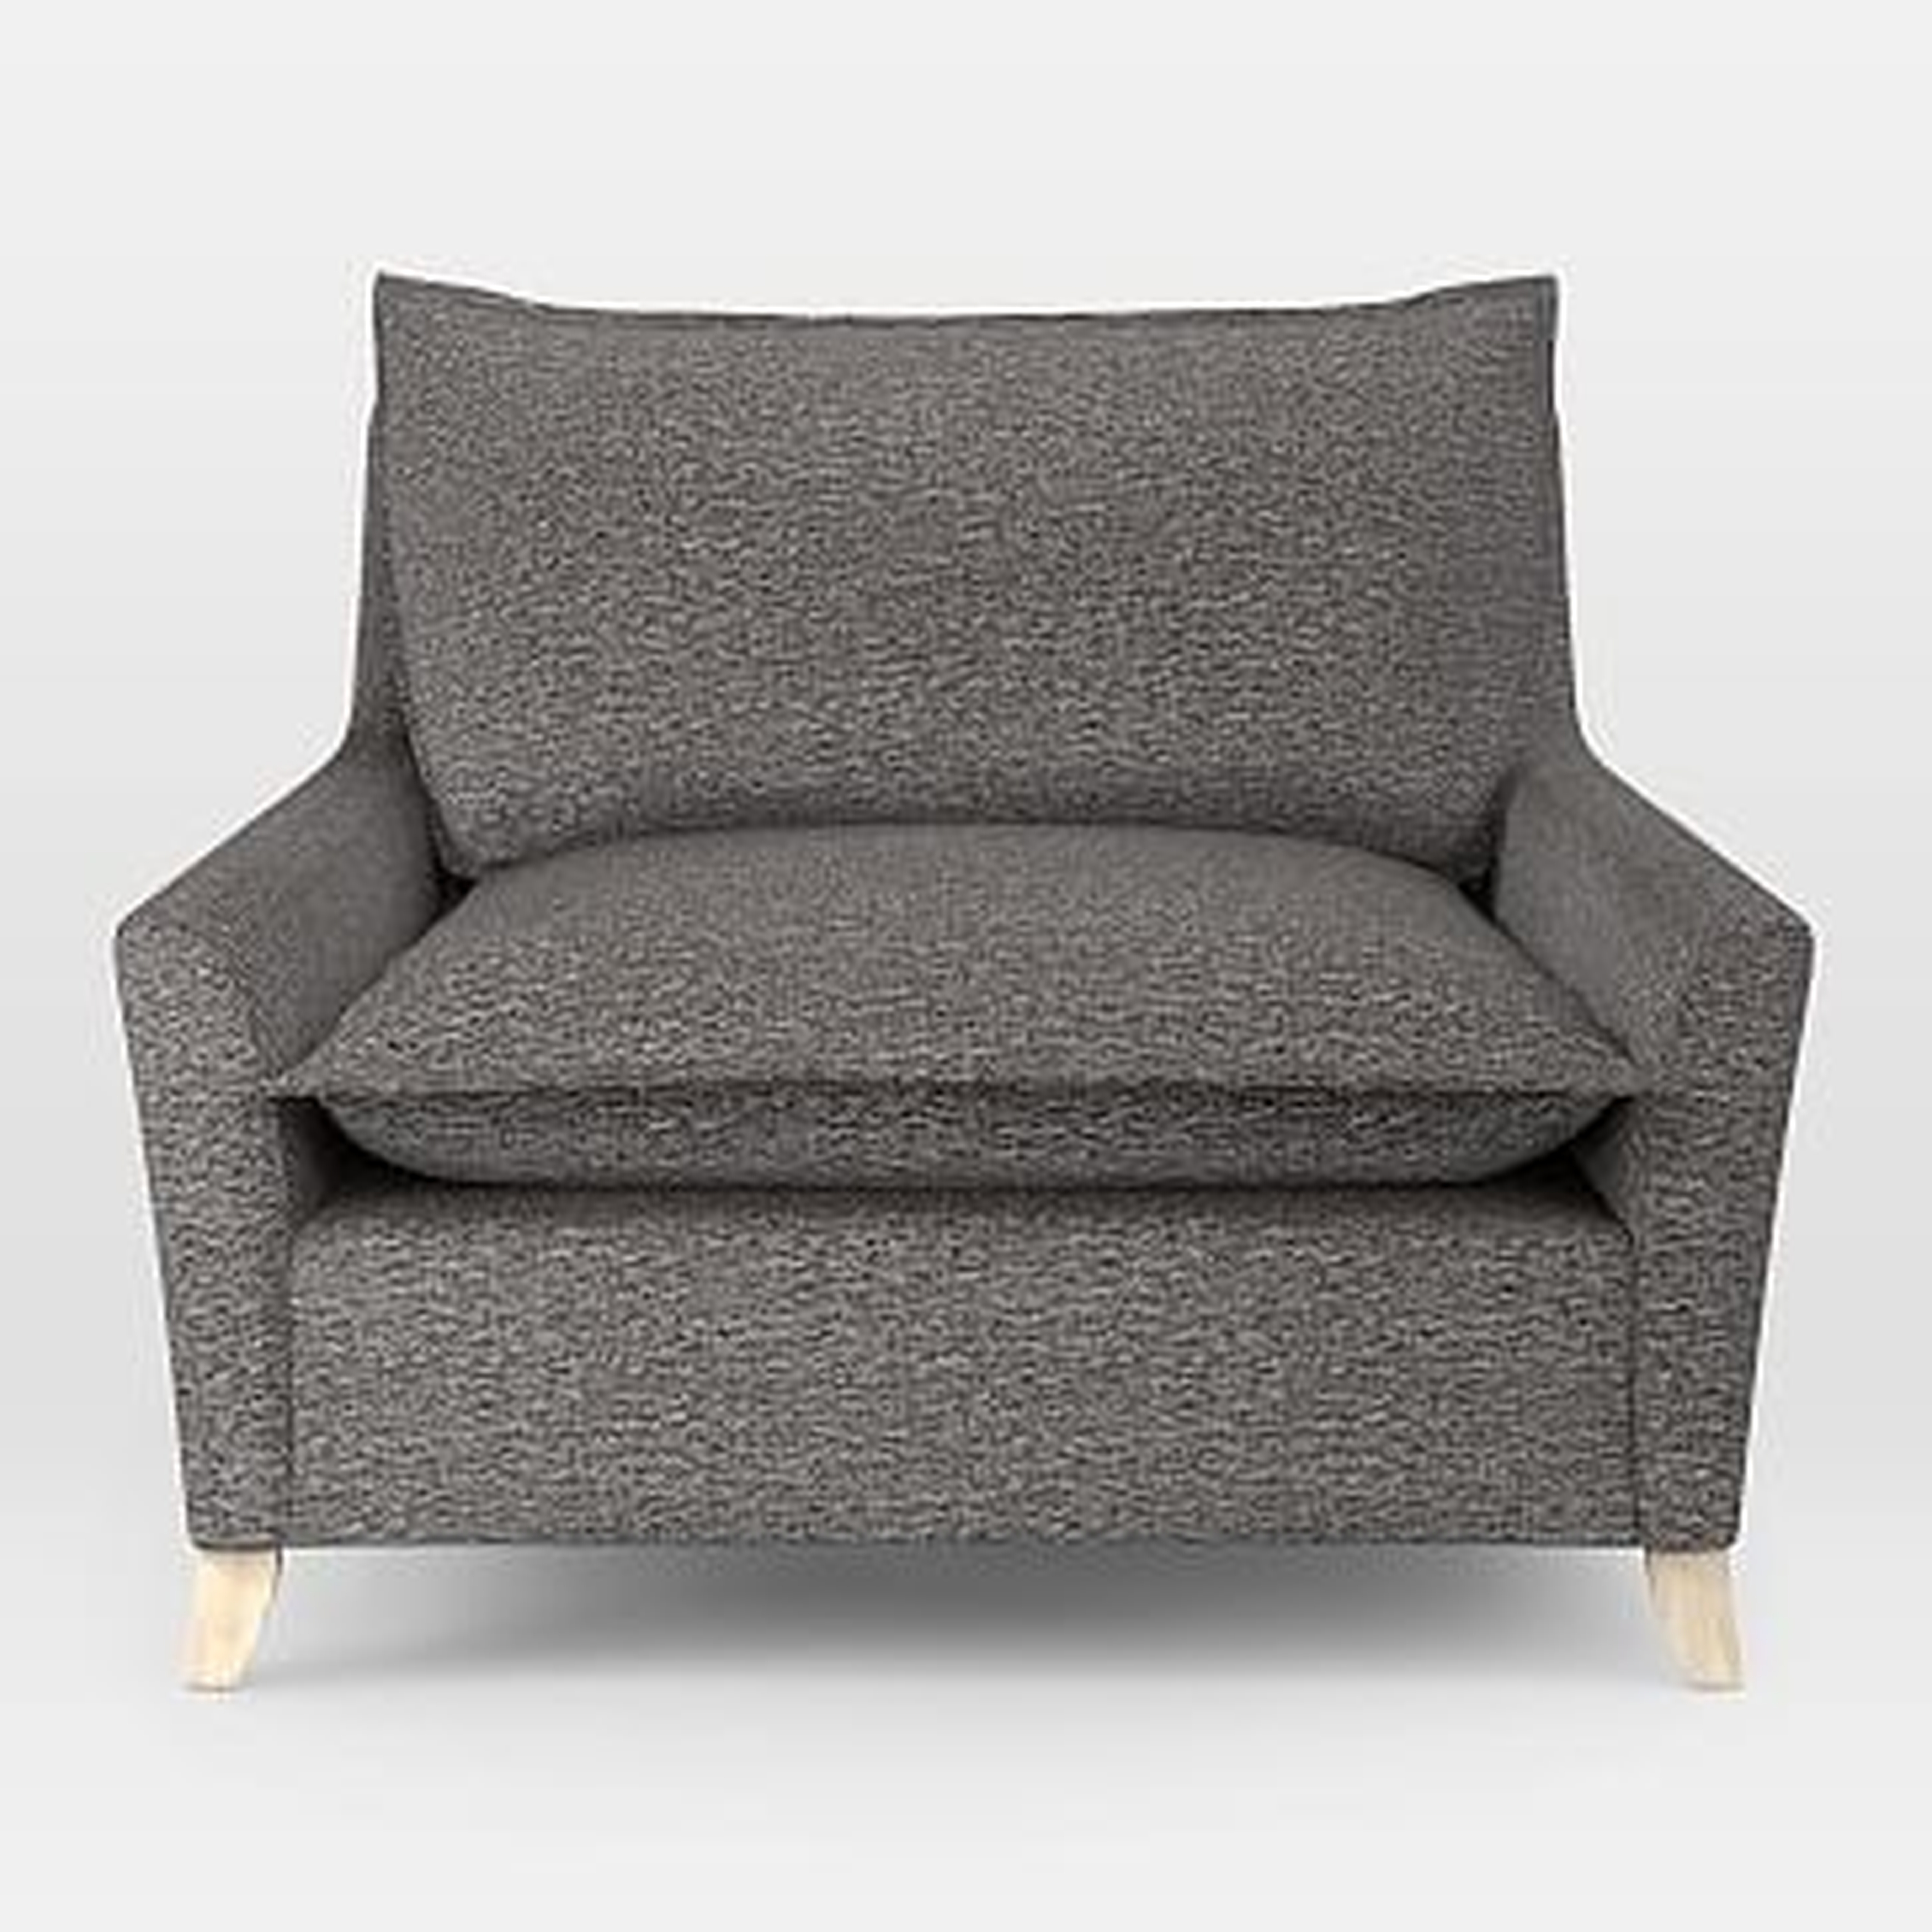 Bliss Down-Filled Chair-and-a-Half, Retro Weave, Feather Gray - West Elm